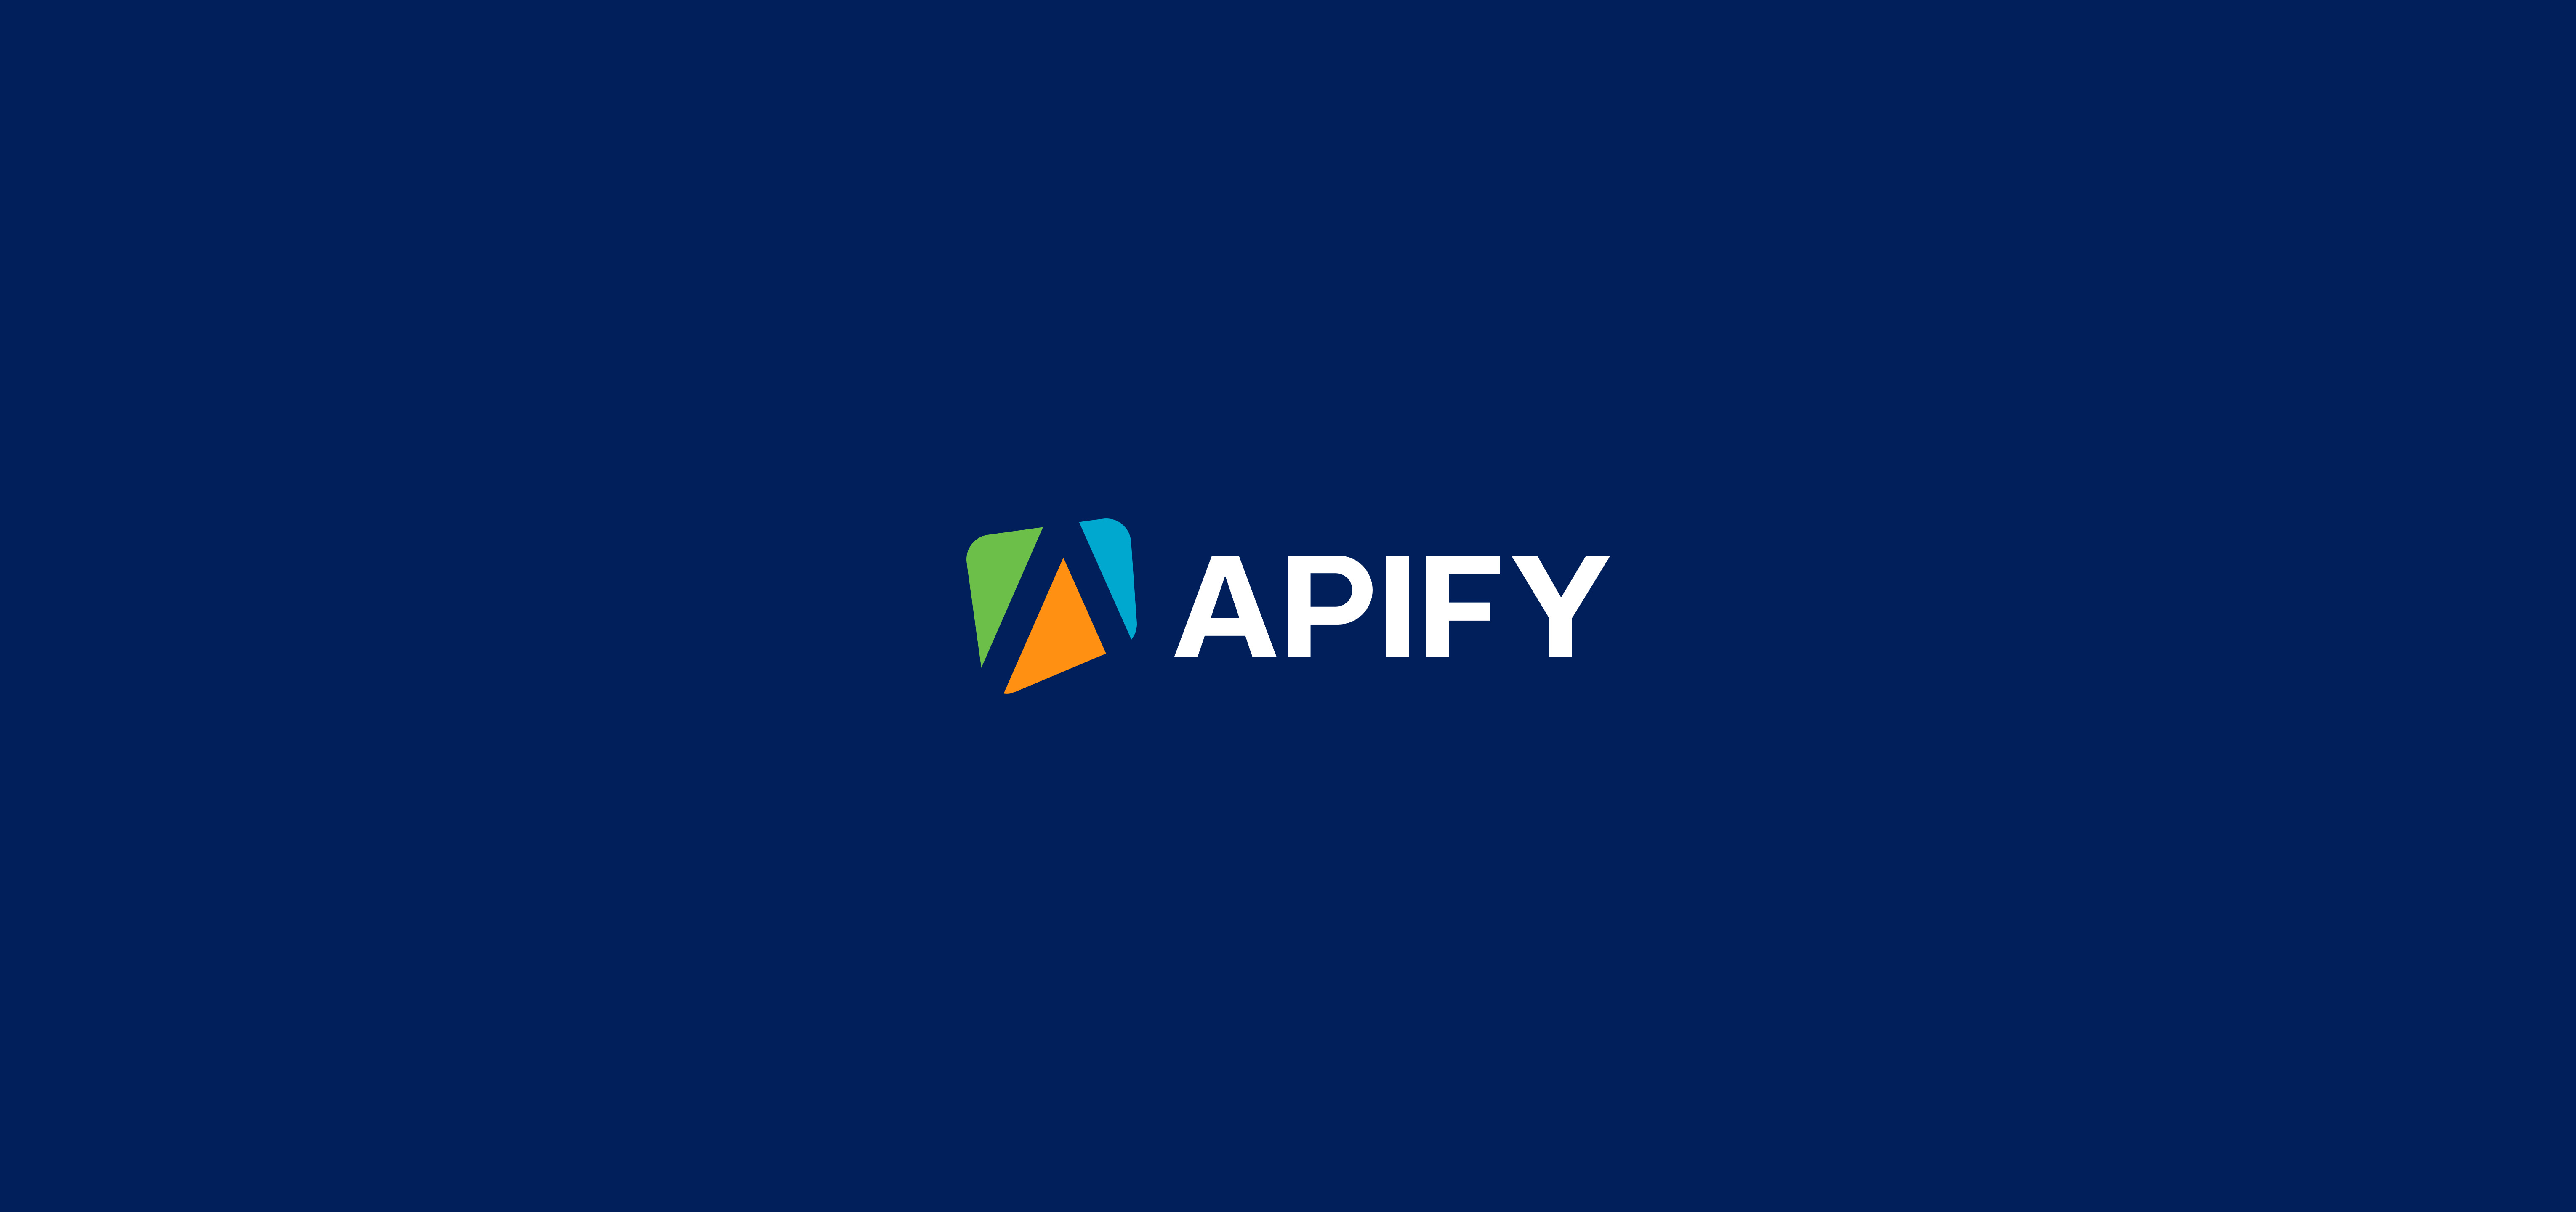 20-facts-about-apify